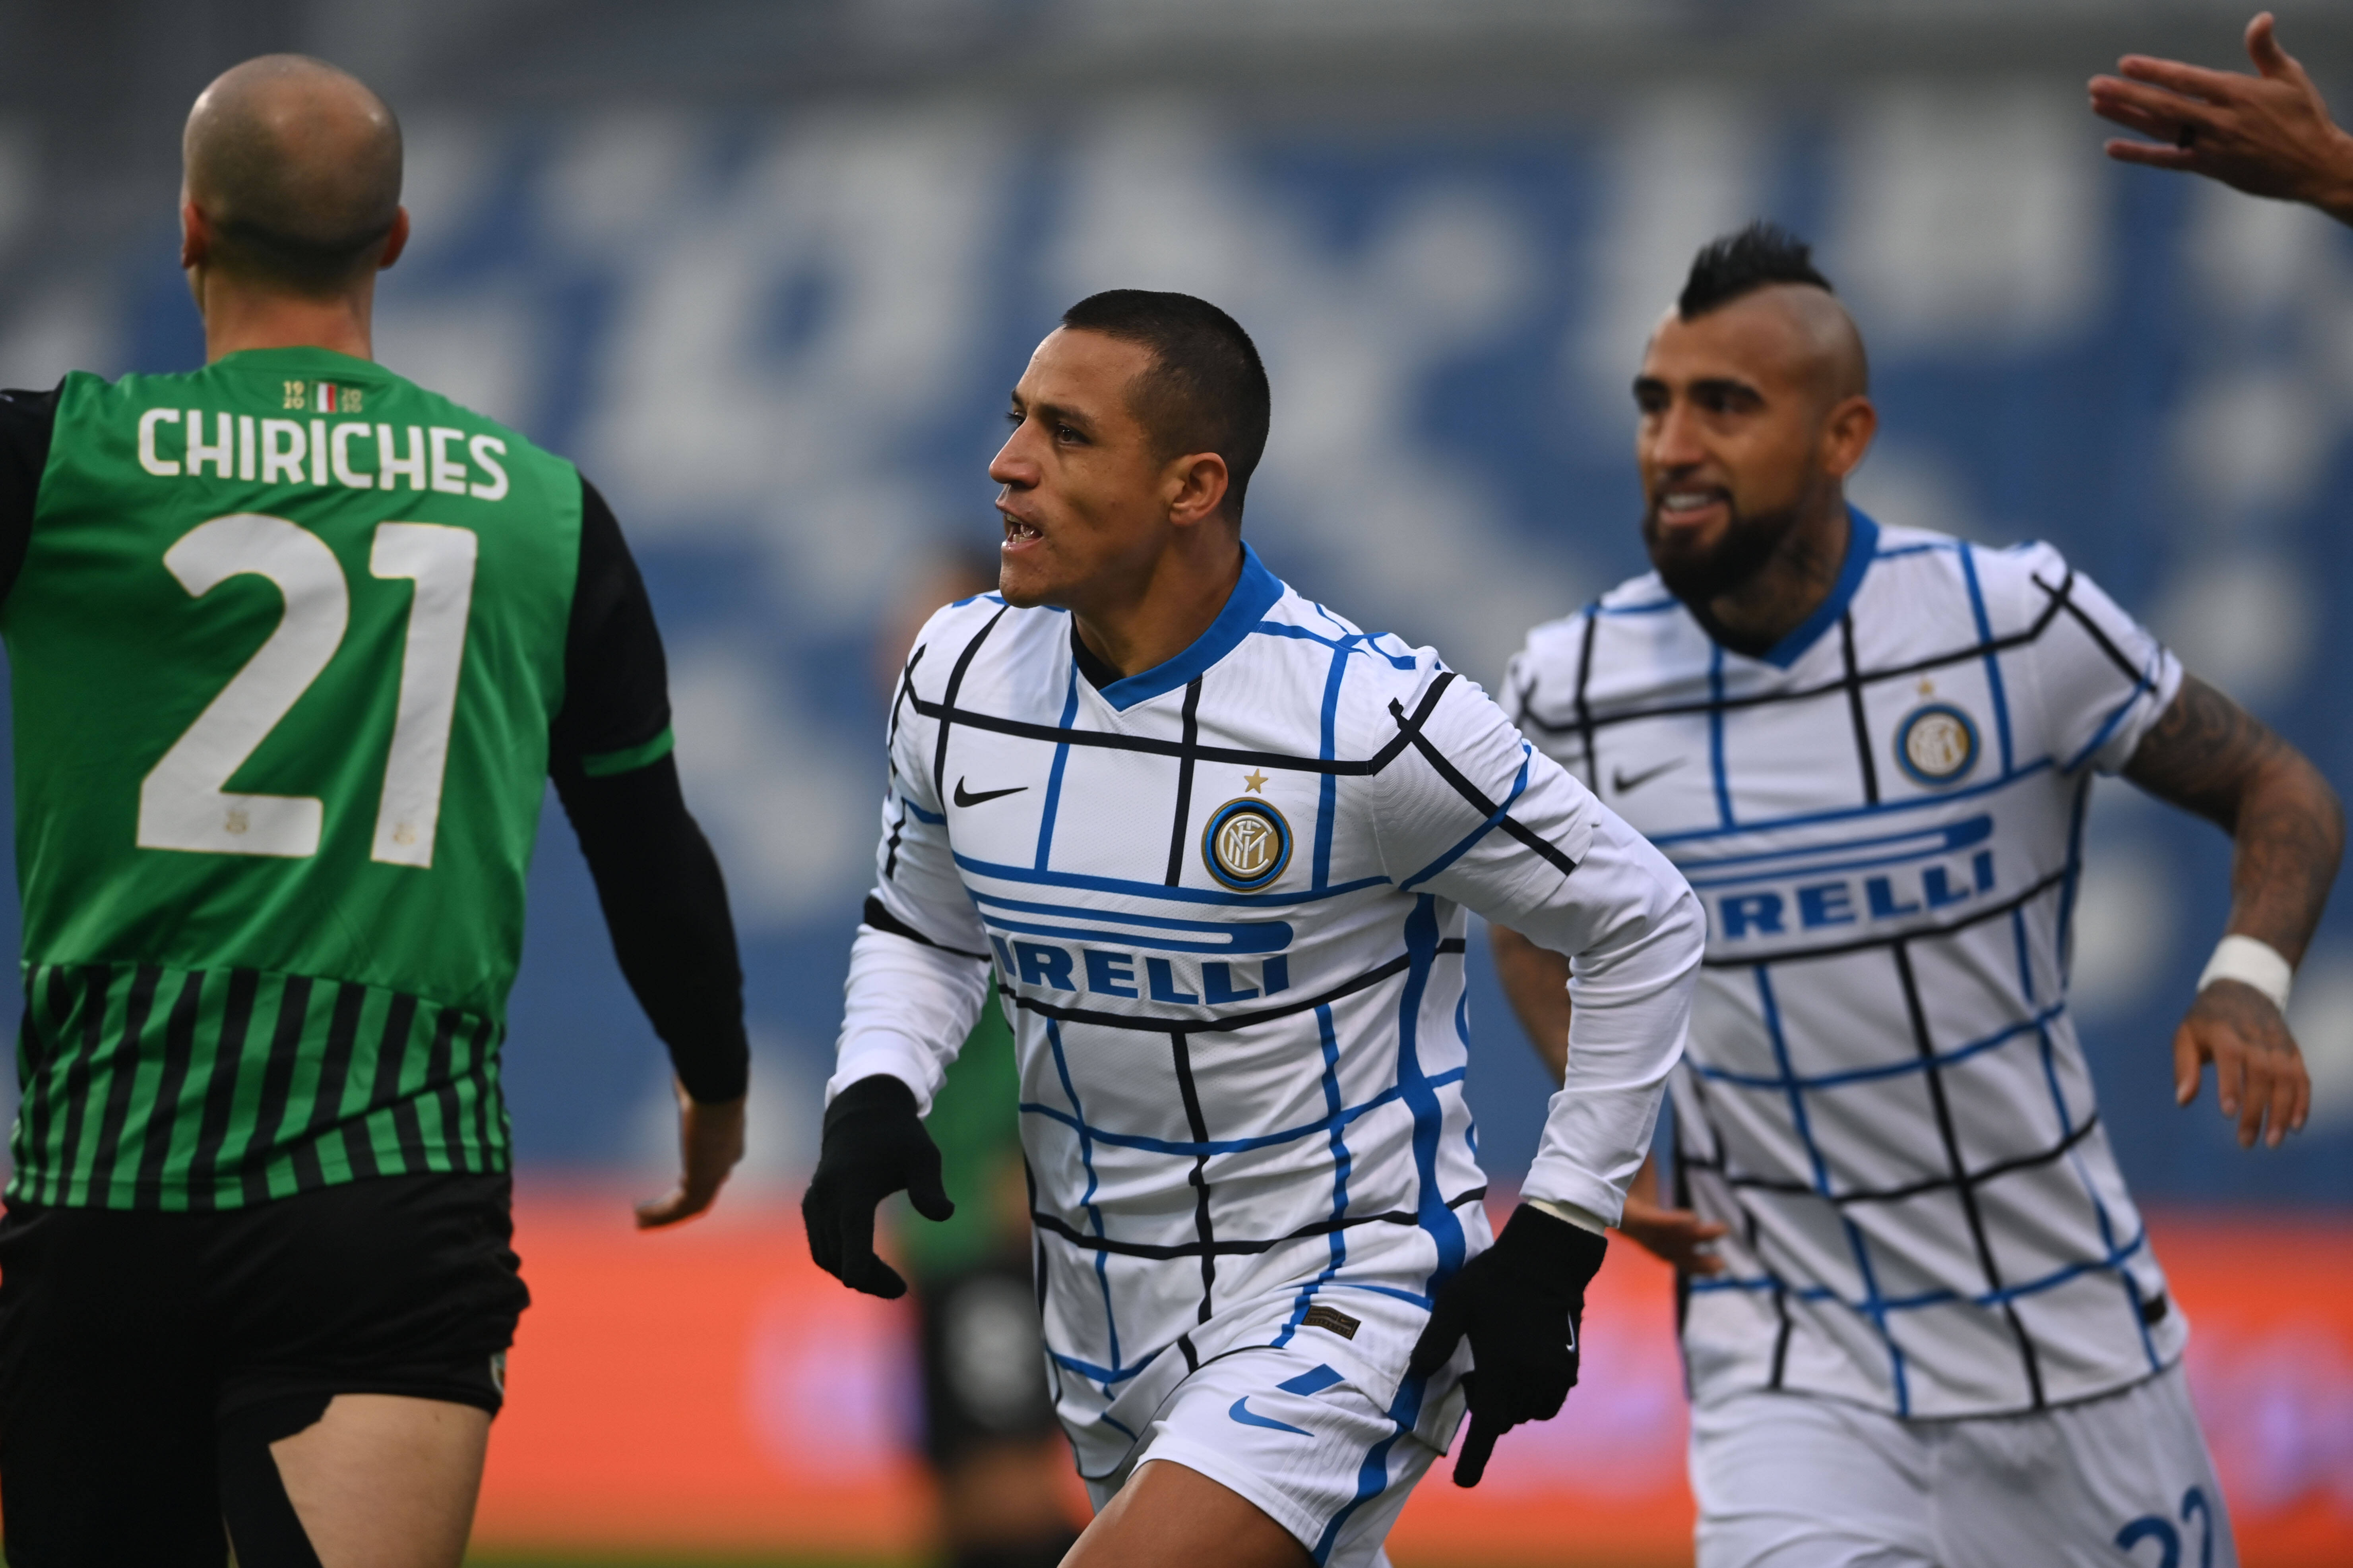 Alexis Sanchez (inter) Celebrates After Scoring His Team S First Goal During The Italian Serie A Match Between Sassuolo